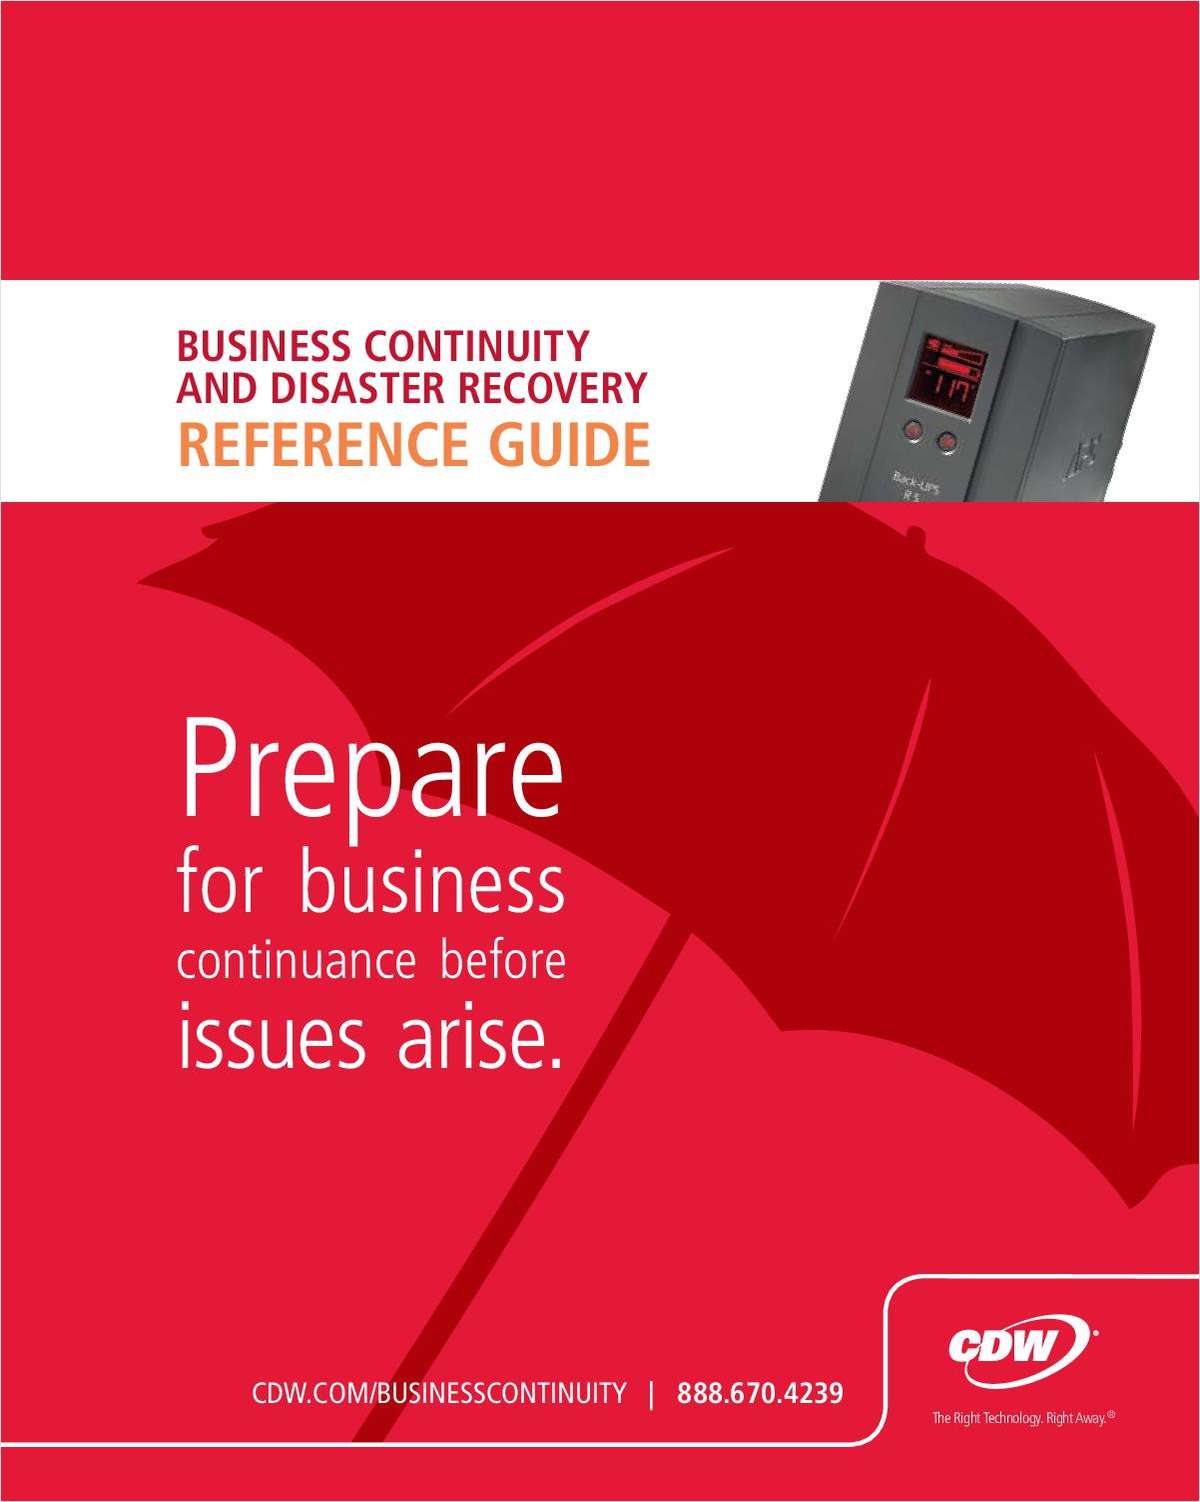 Business Continuity and Disaster Recovery Guide